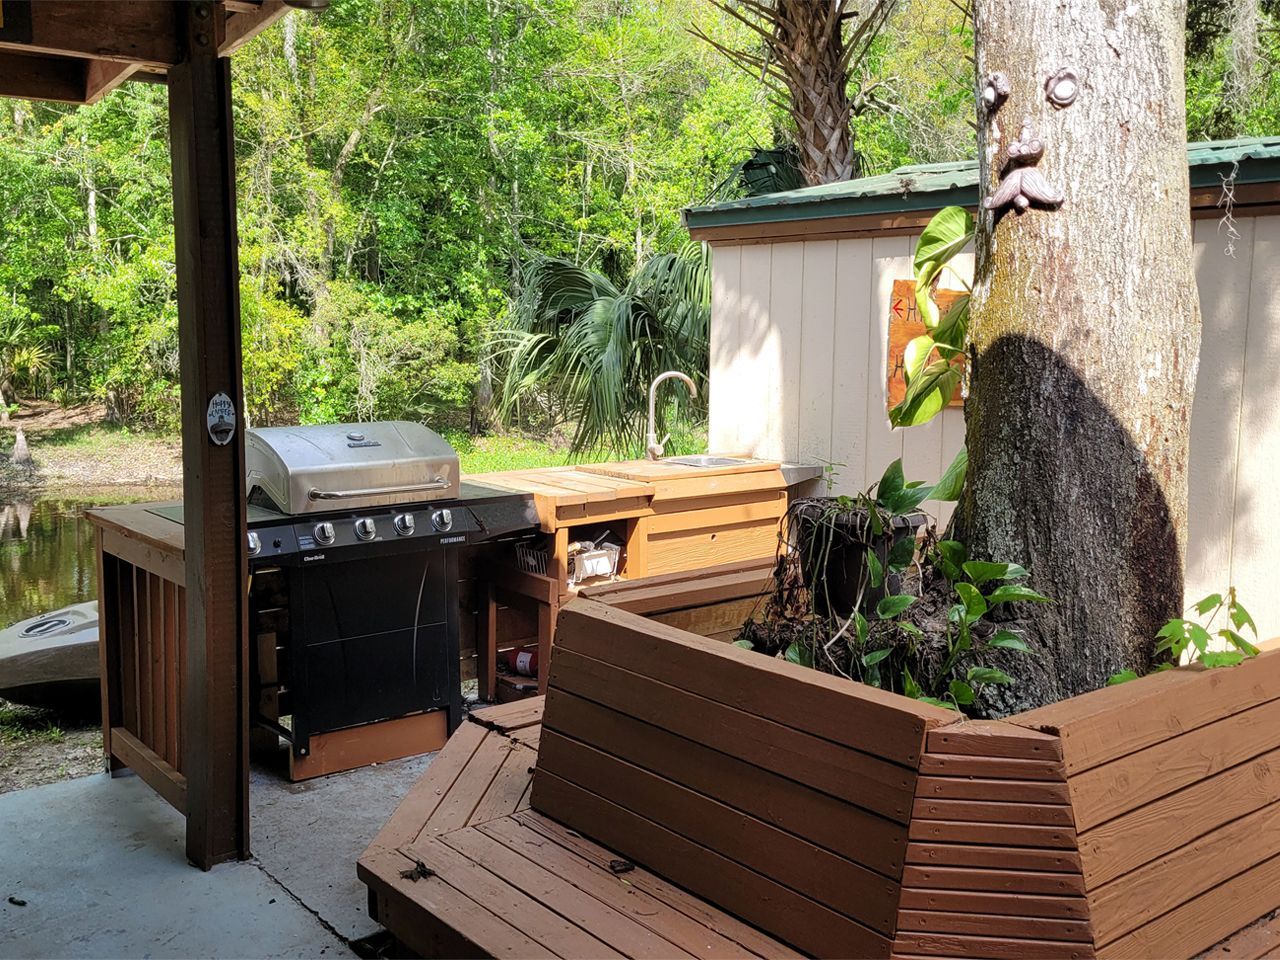 a grill is sitting on a wooden deck next to a tree .